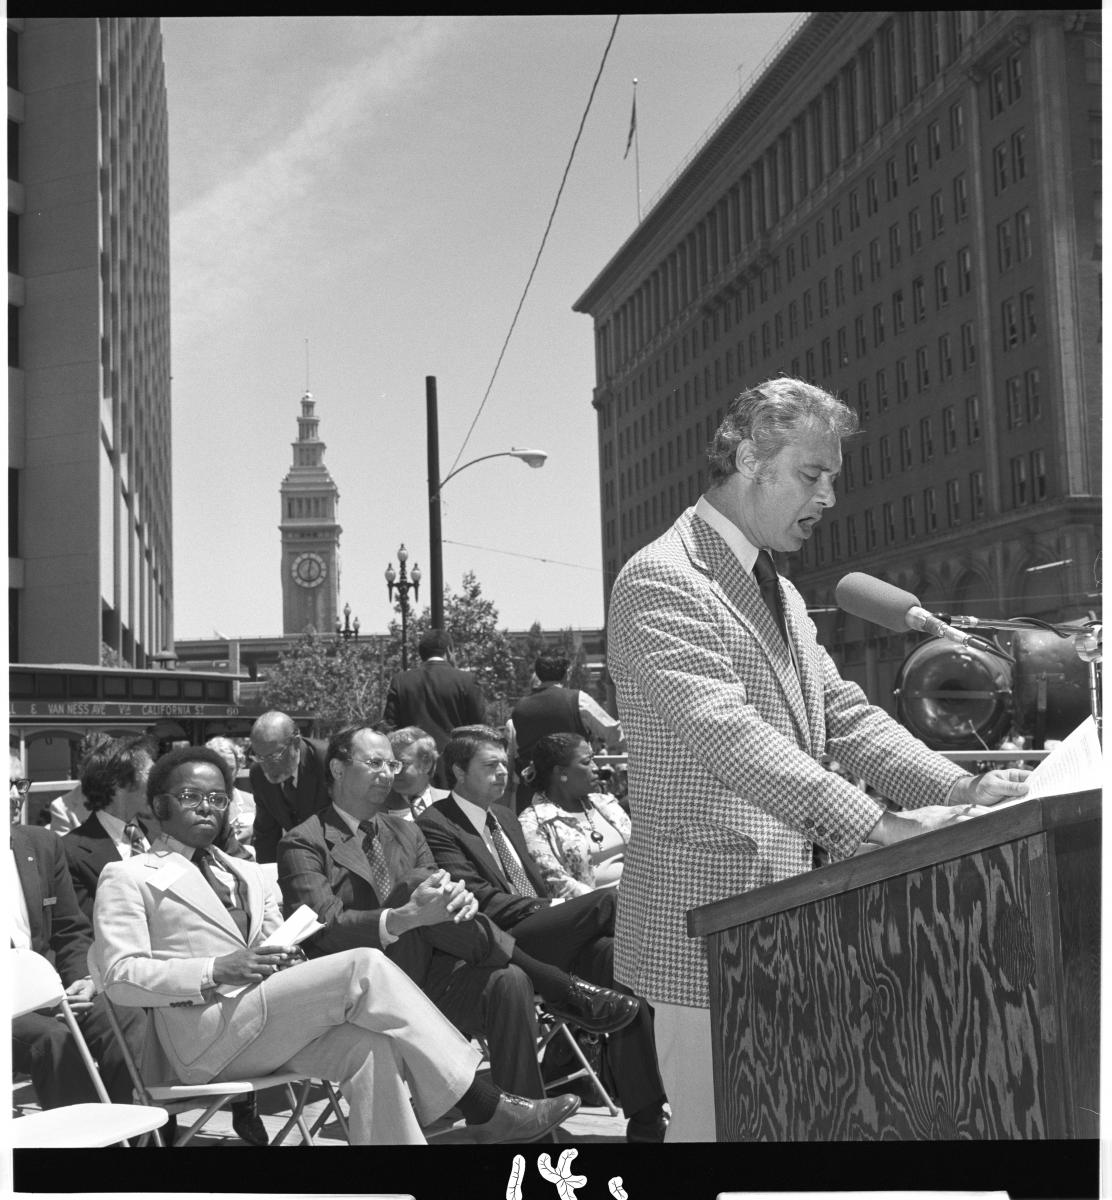 Mayor George Moscone speaking from podium with crowd of people, Ferry Building, and cable car in background